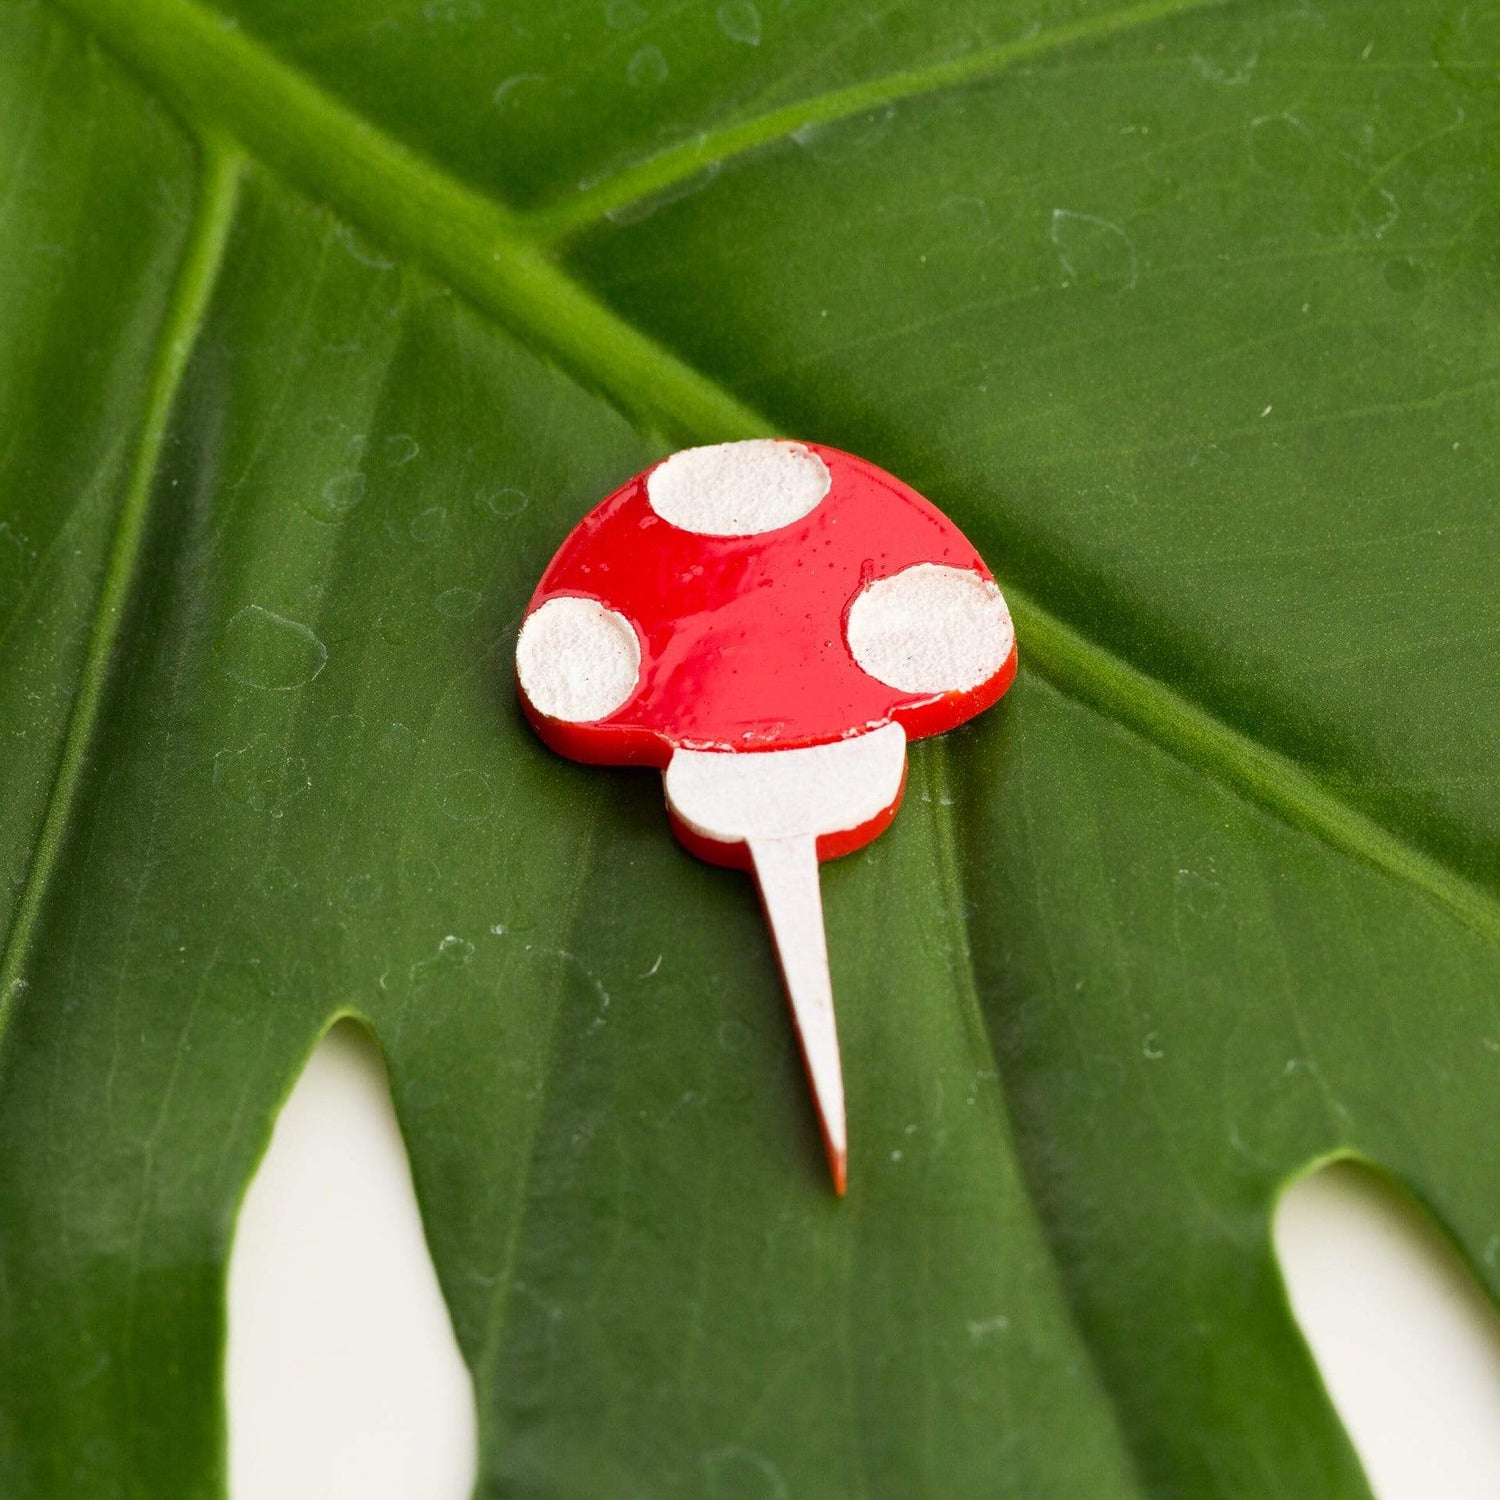 Urban Sprouts Production Plant Accessories Red + White / 3 Spot Cap Mini Mushroom Stake